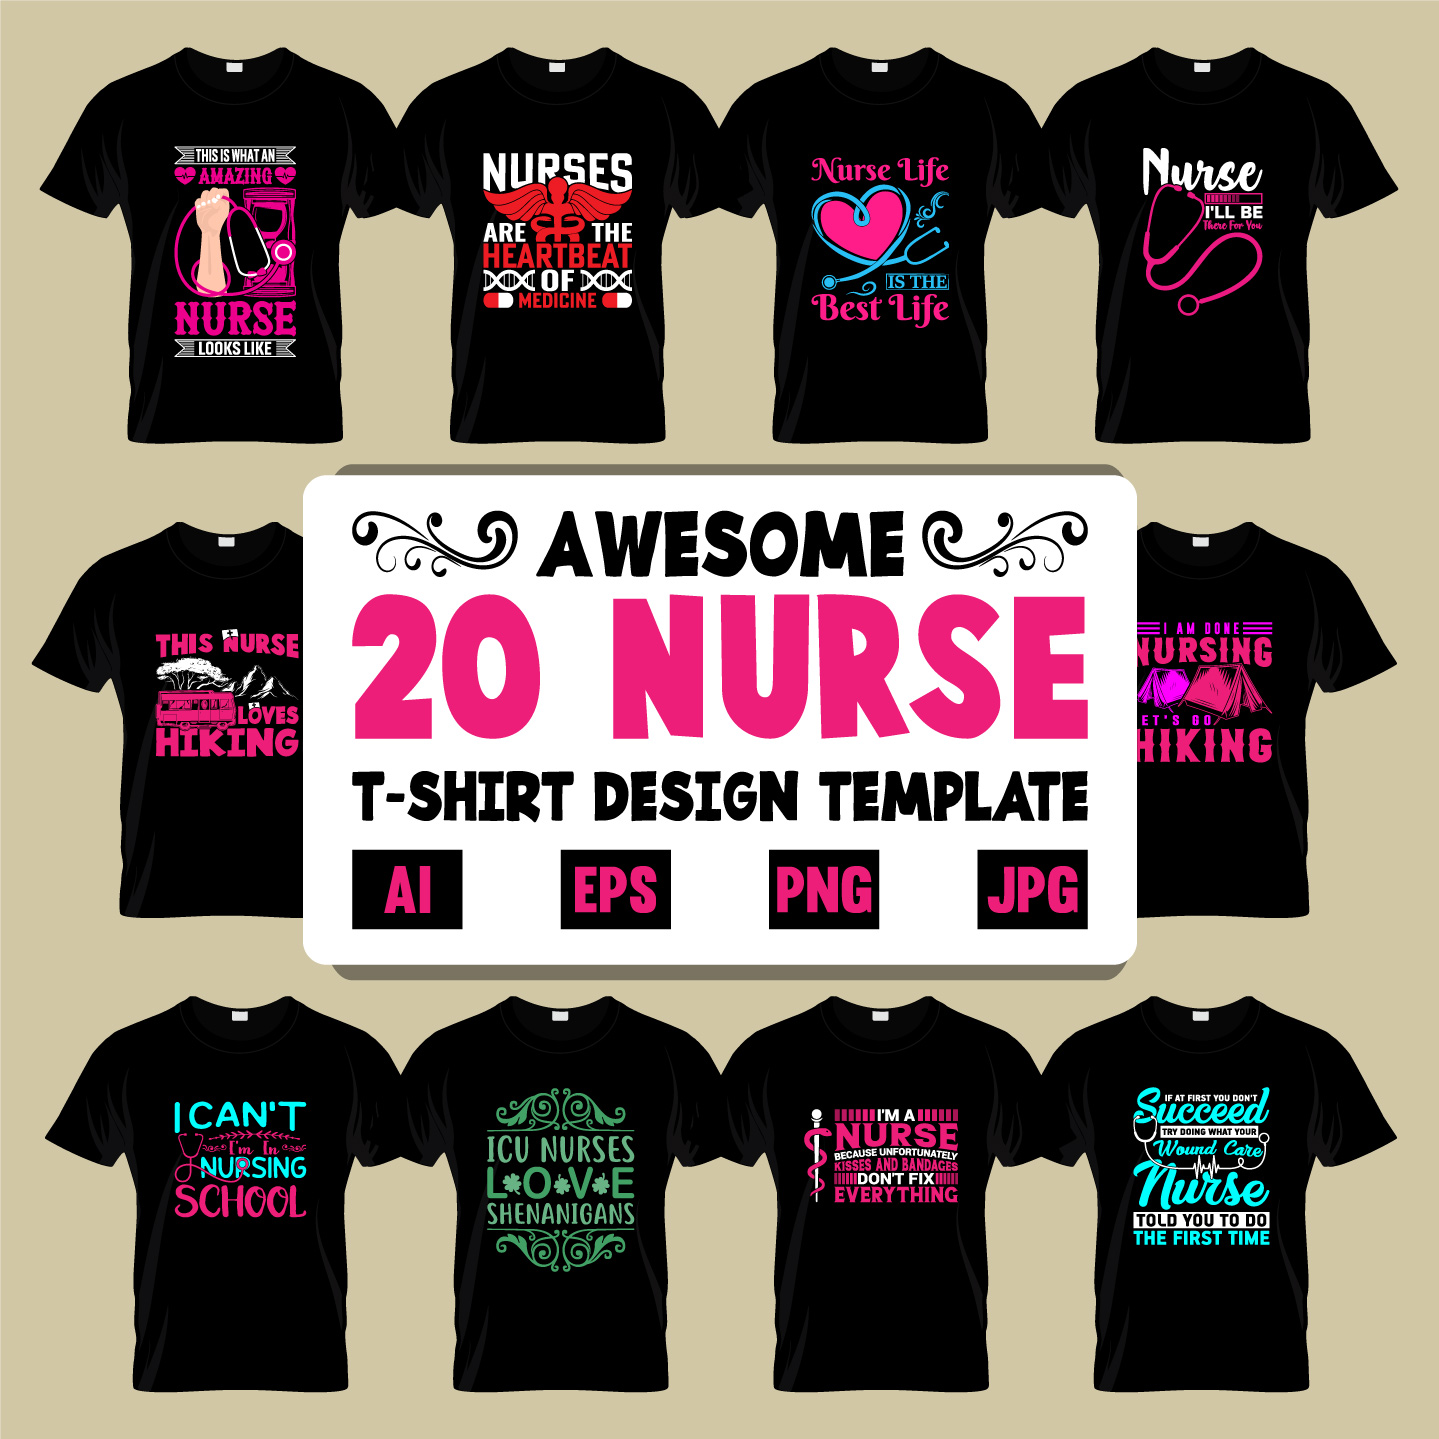 This is high quality nurse t-shirt design template with printable file preview image.